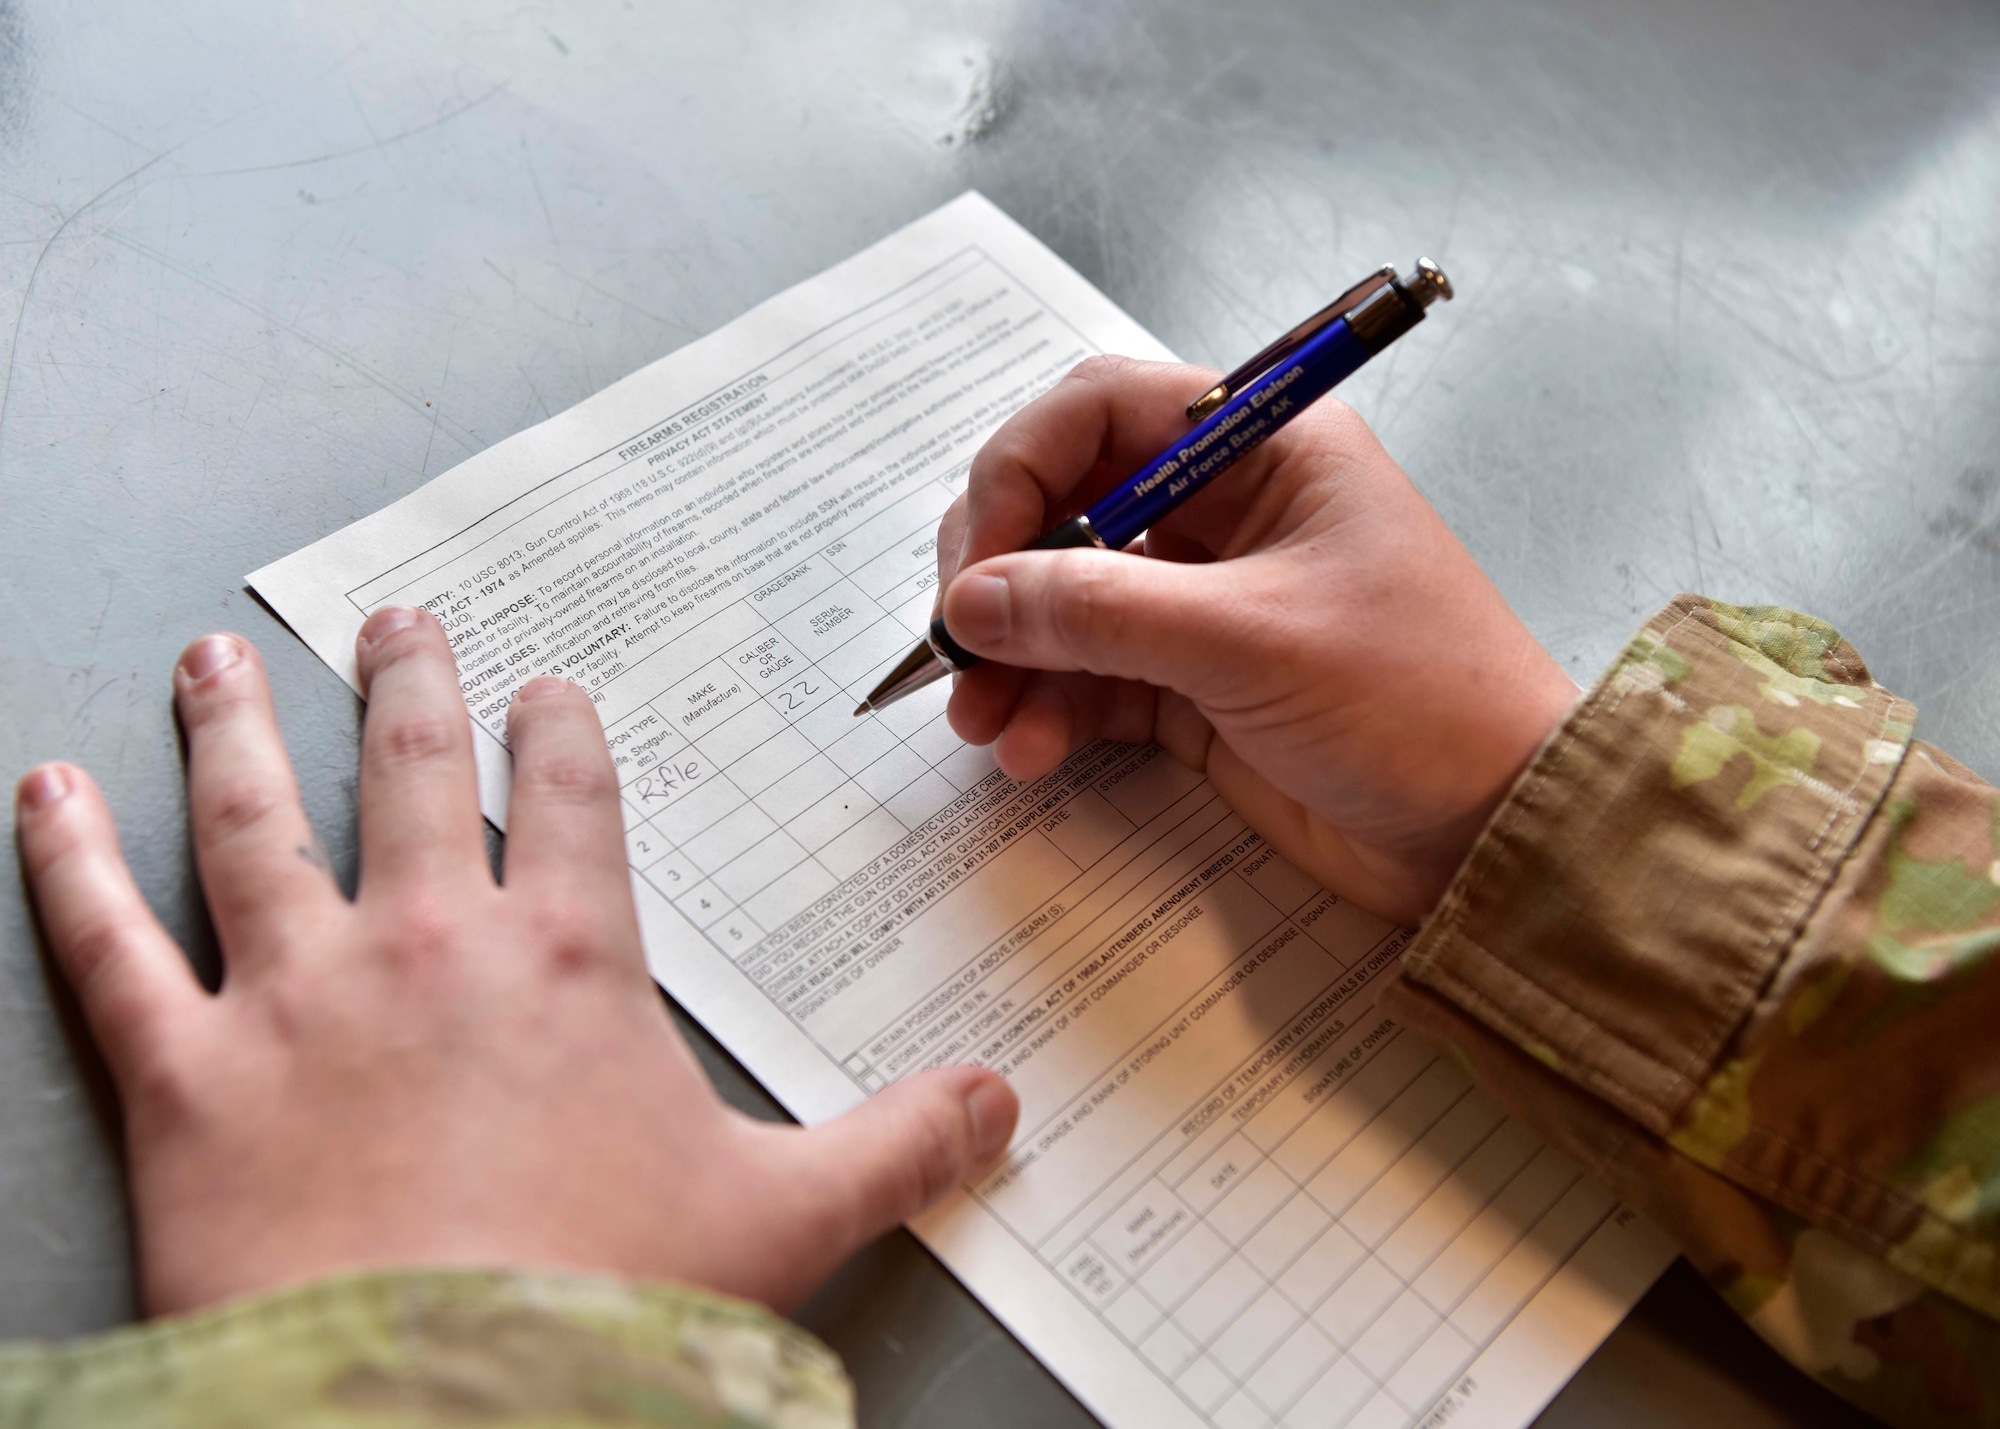 An Airman assigned to the 354th Fighter Wing completes an Air Force Form 1314 Firearms Registration on Eielson Air Force Base, Alaska, Aug. 21, 2020. Airmen are allowed to own firearms while living on base only if they register them with the 354th Security Forces Squadron to ensure proper accountability. (U.S. Air Force photo by Senior Airman Beaux Hebert)